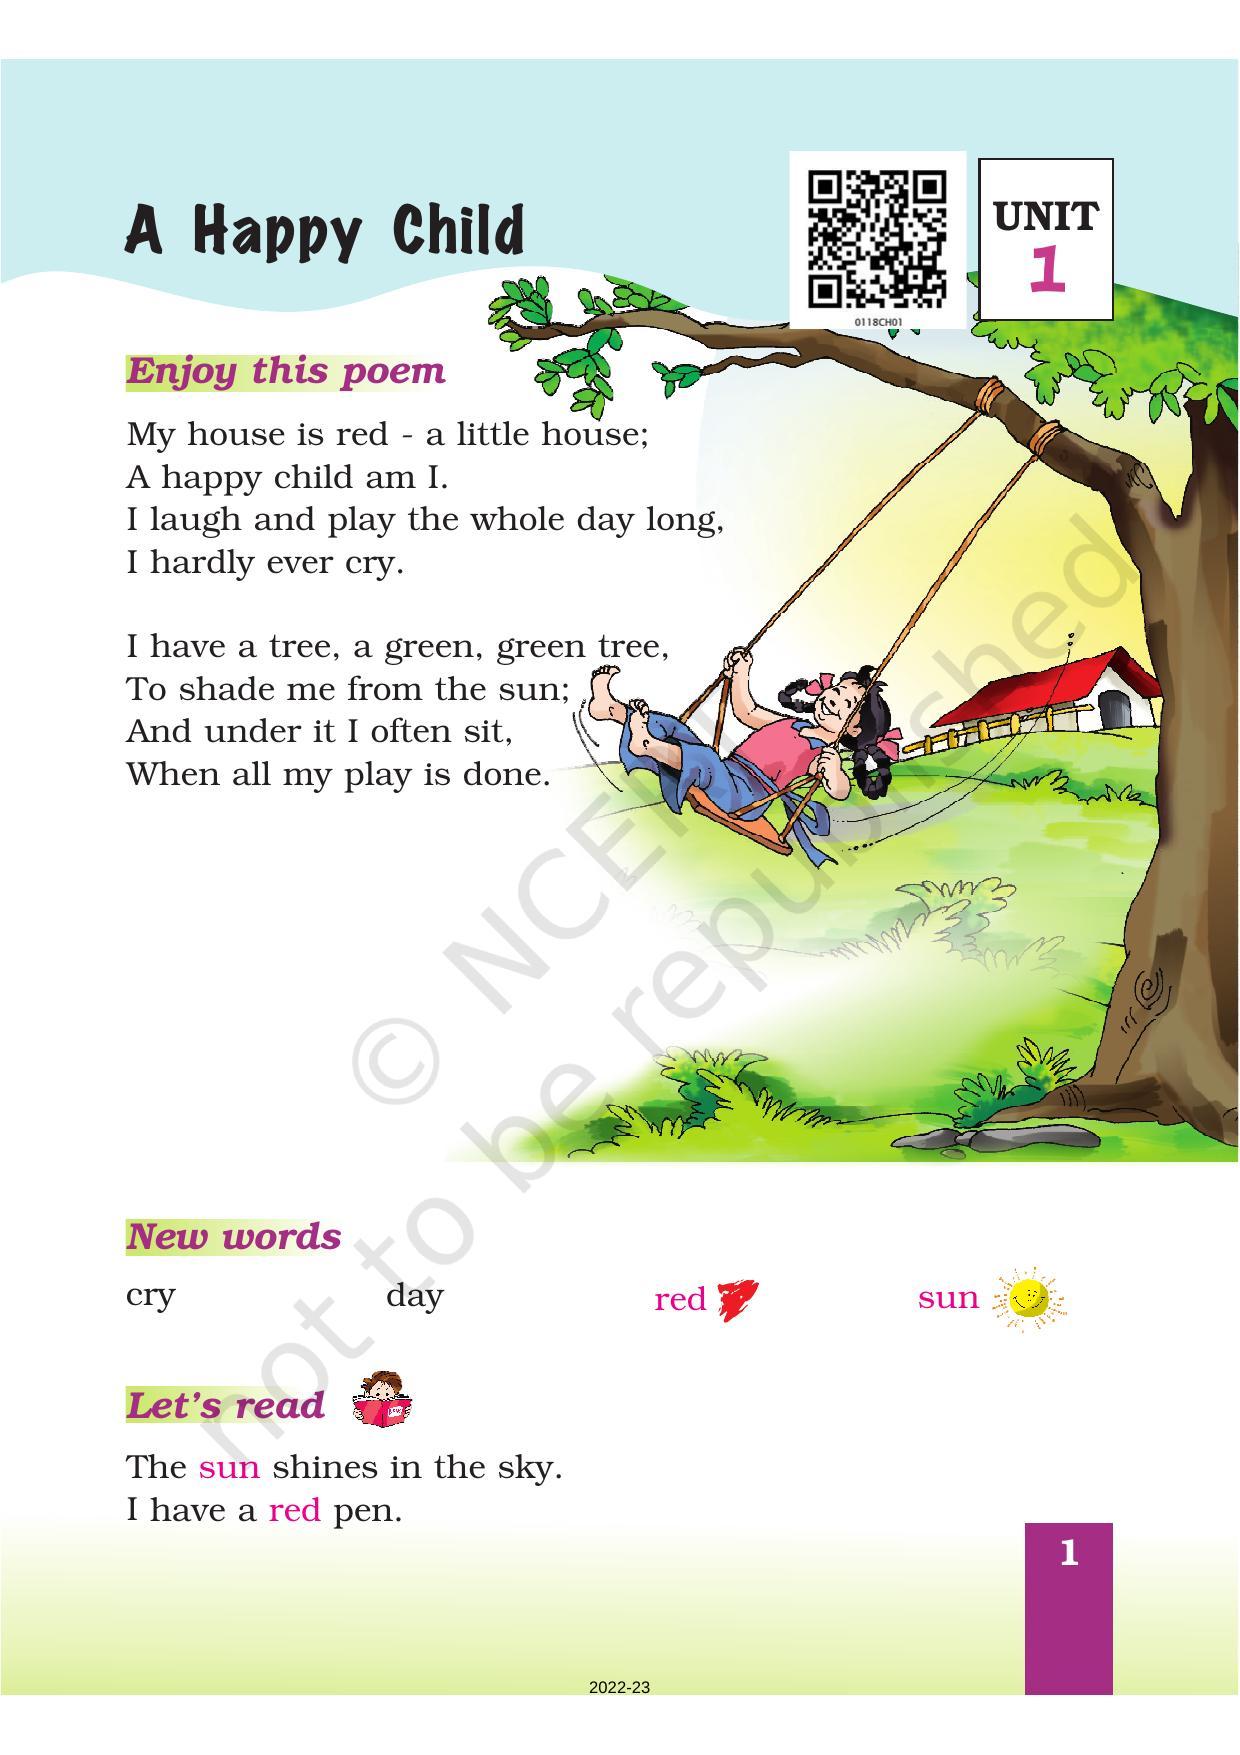 NCERT Book for Class 1 English (Marigold):Unit 1Poem-A Happy Child - Page 1